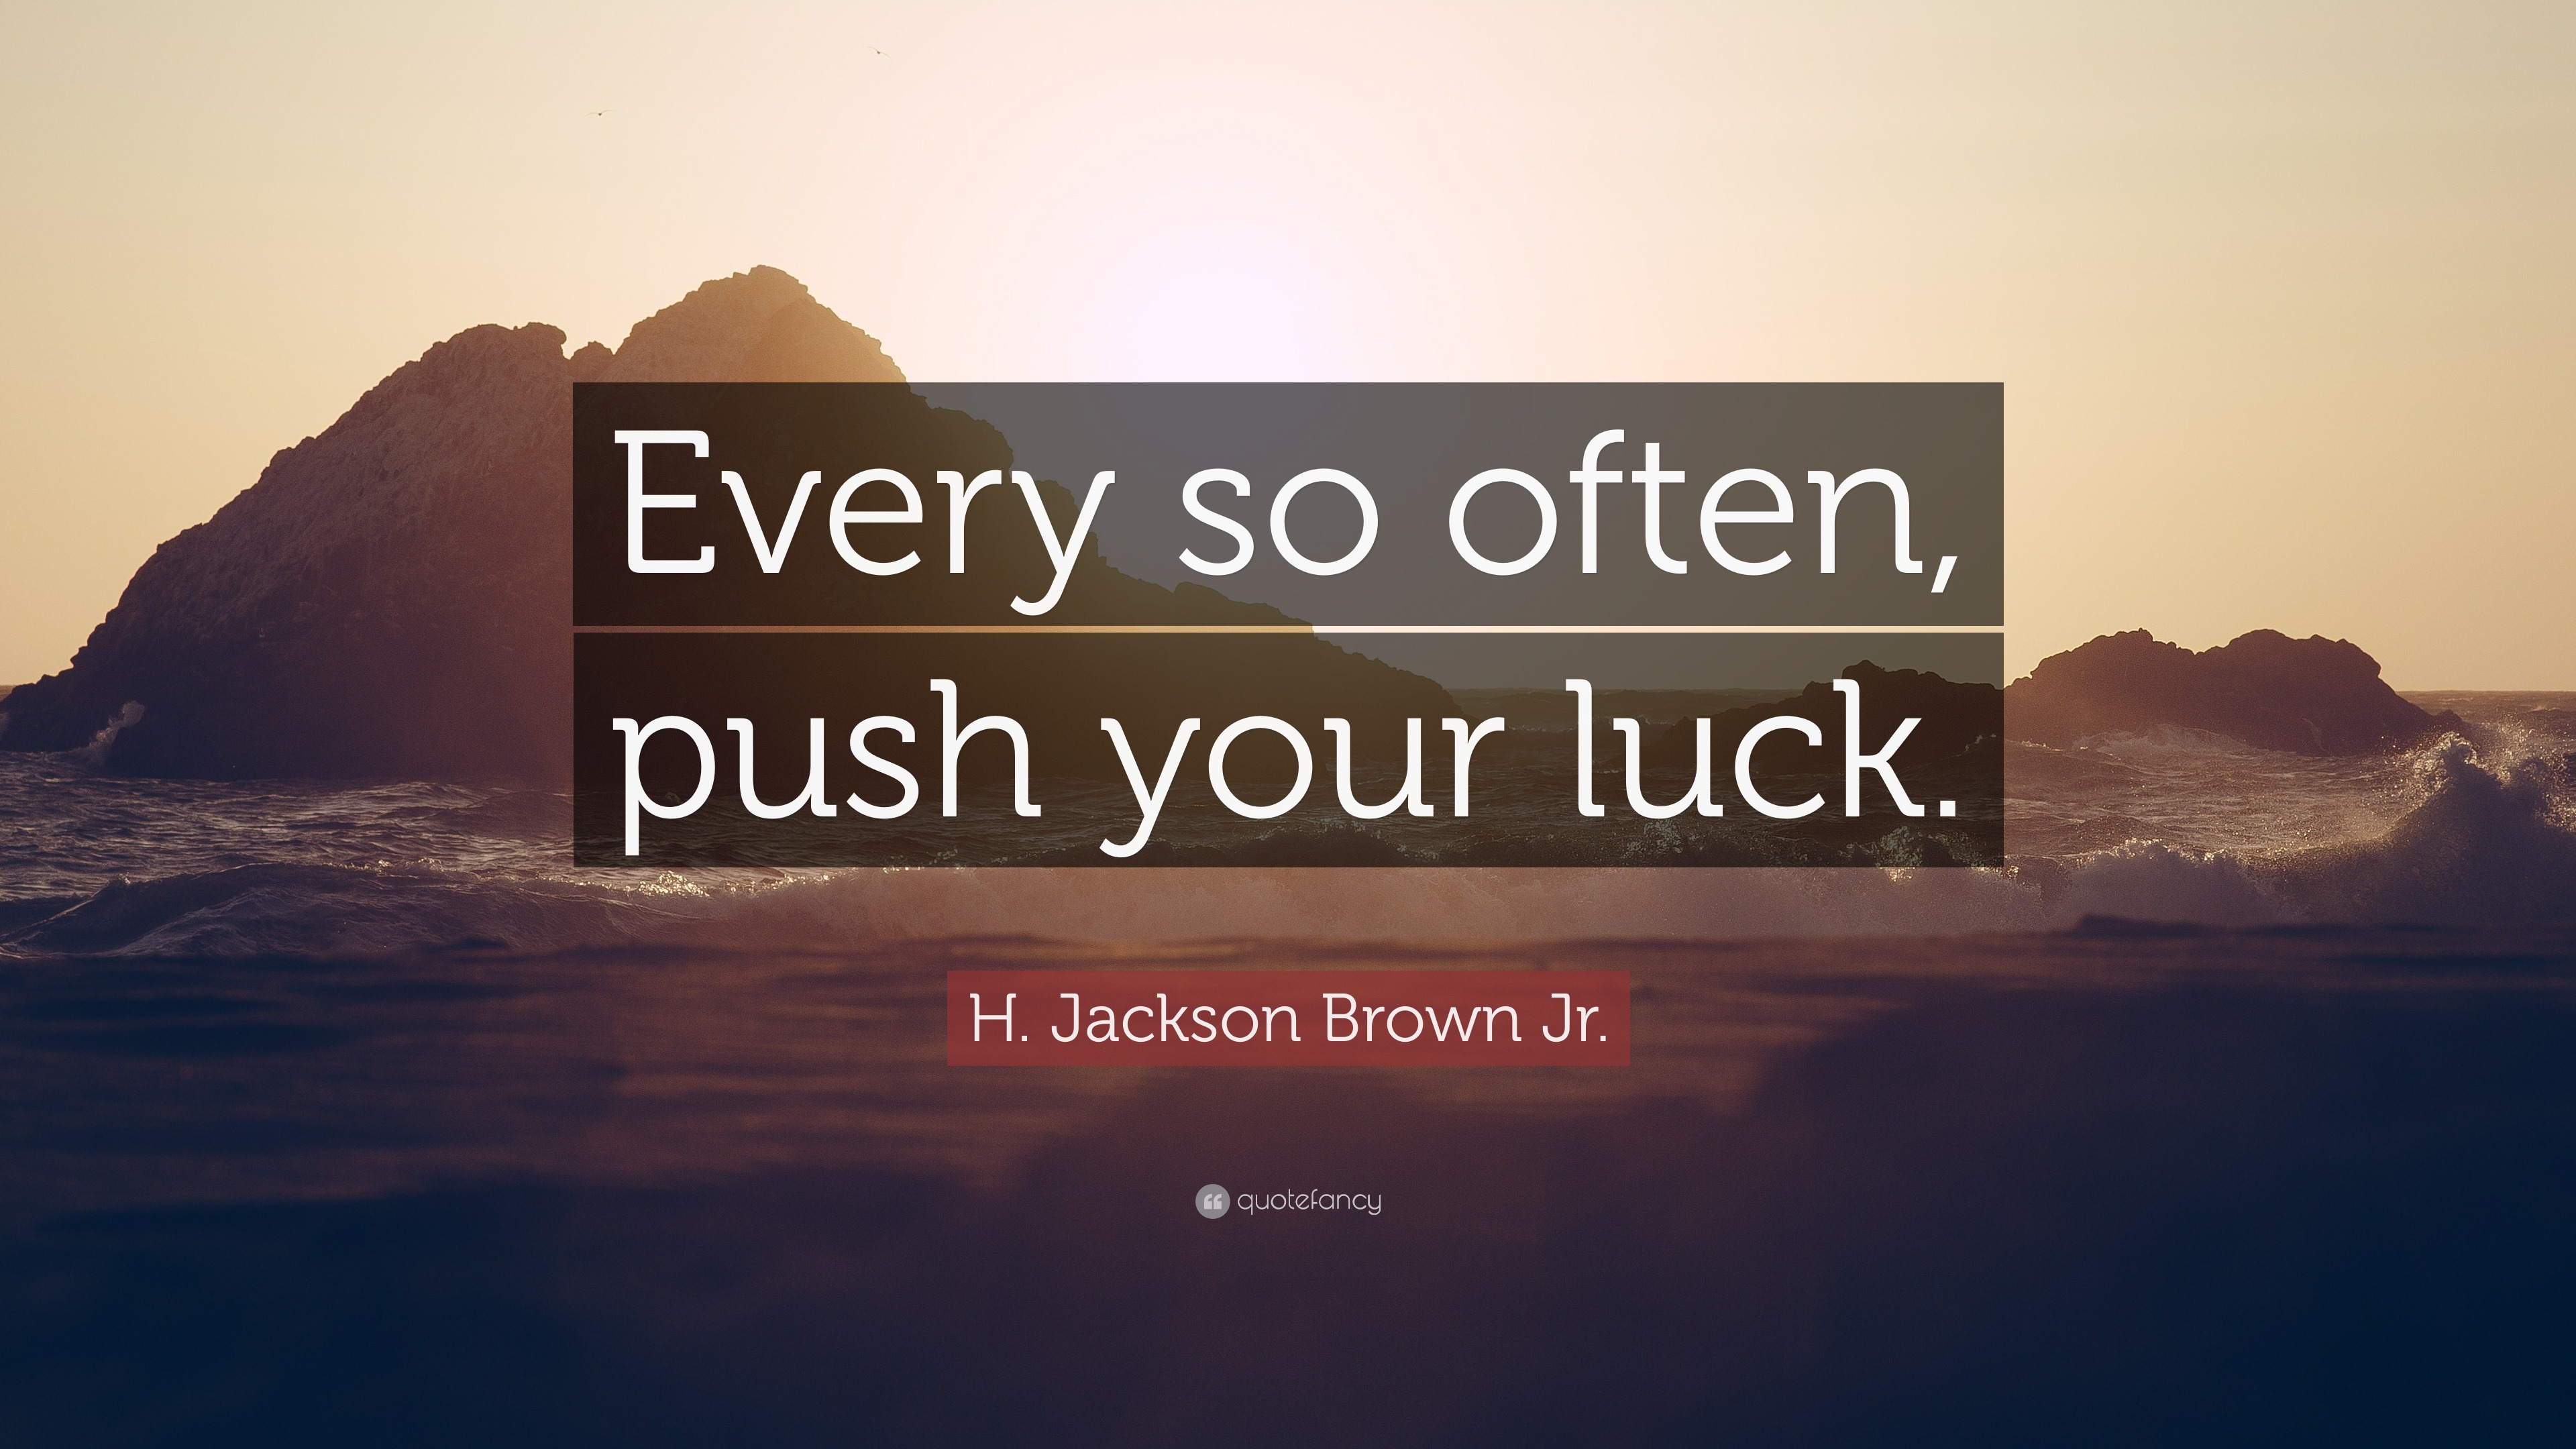 Every so often, push your luck. 